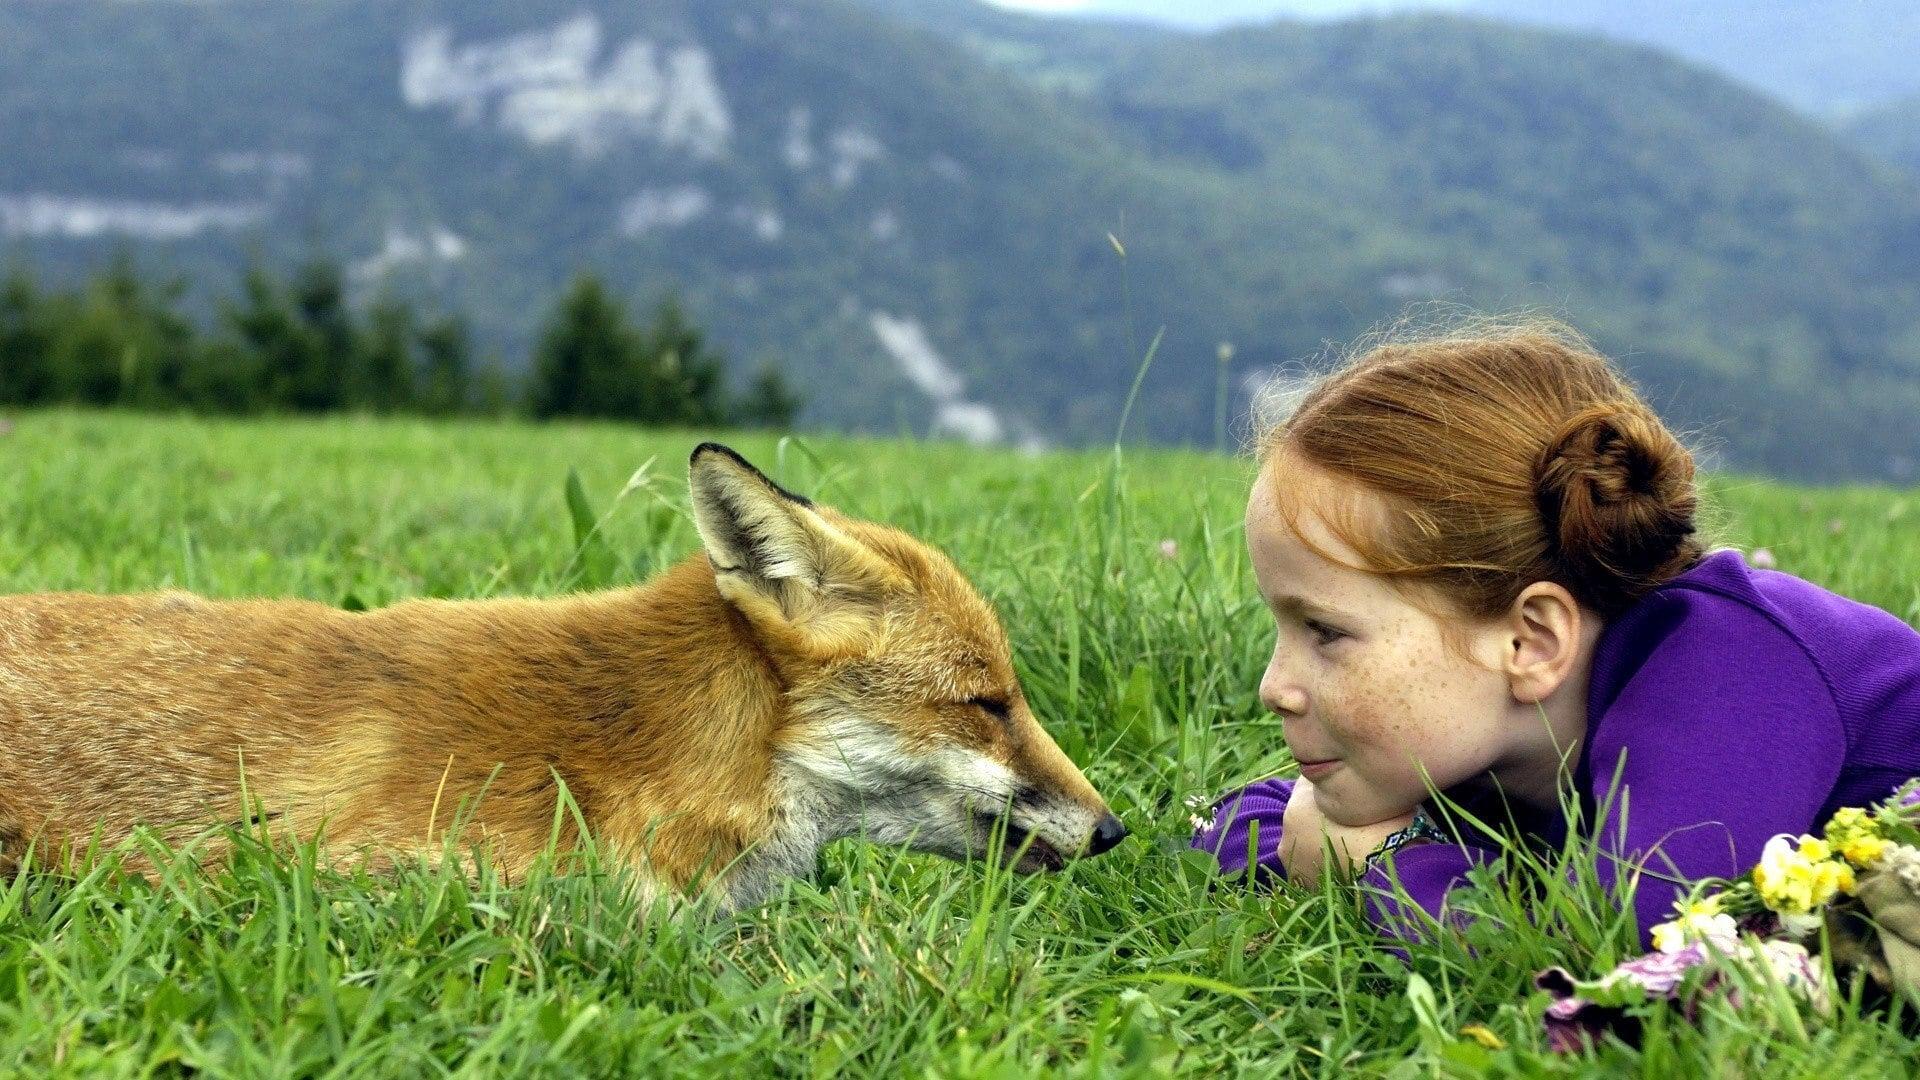 The Fox and the Child backdrop